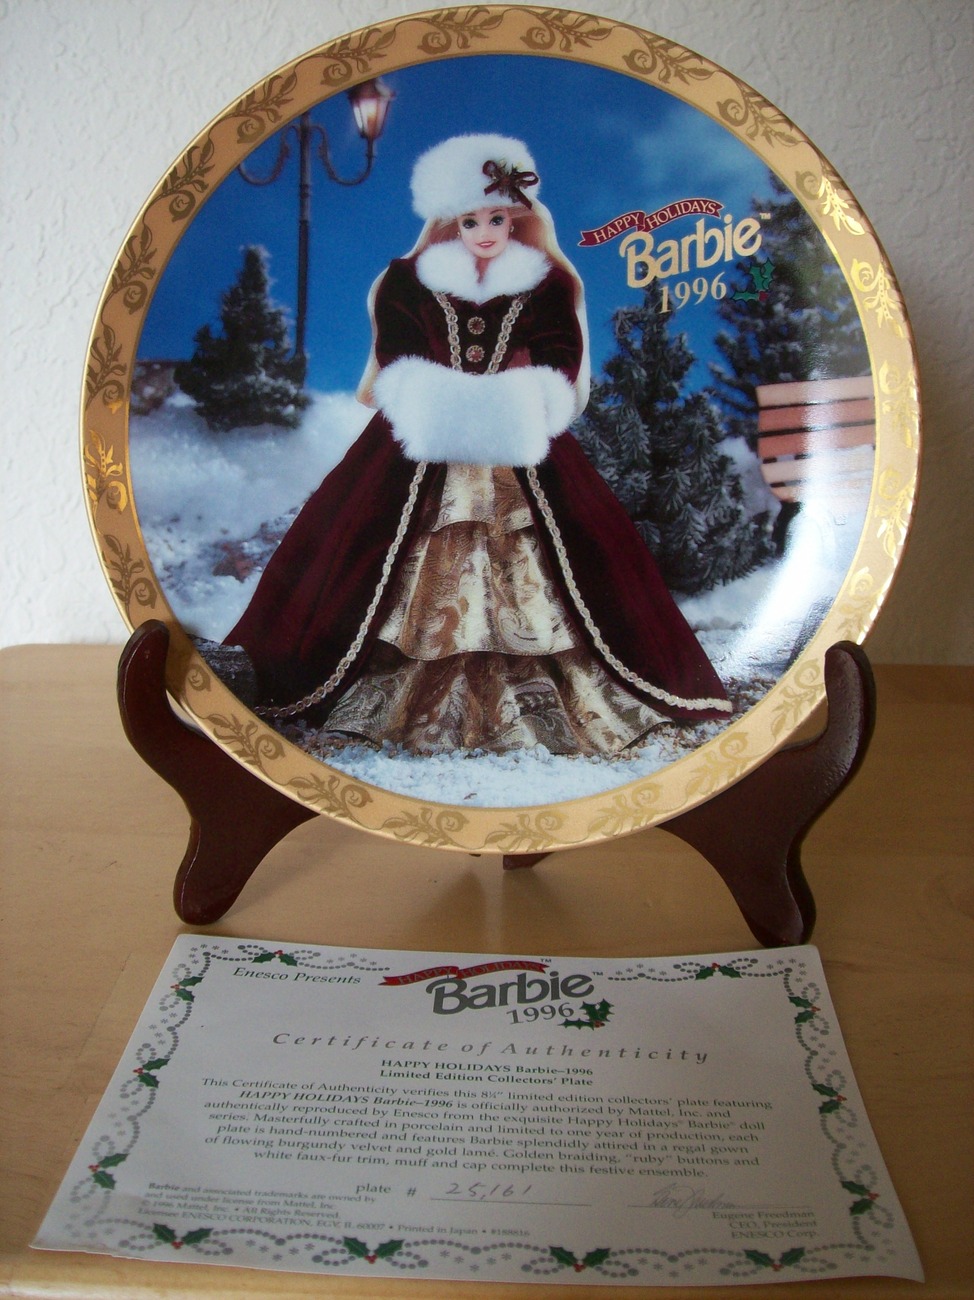 1996 Barbie Enesco Christmas Limited Edition Collector’s Plate. - $25.00